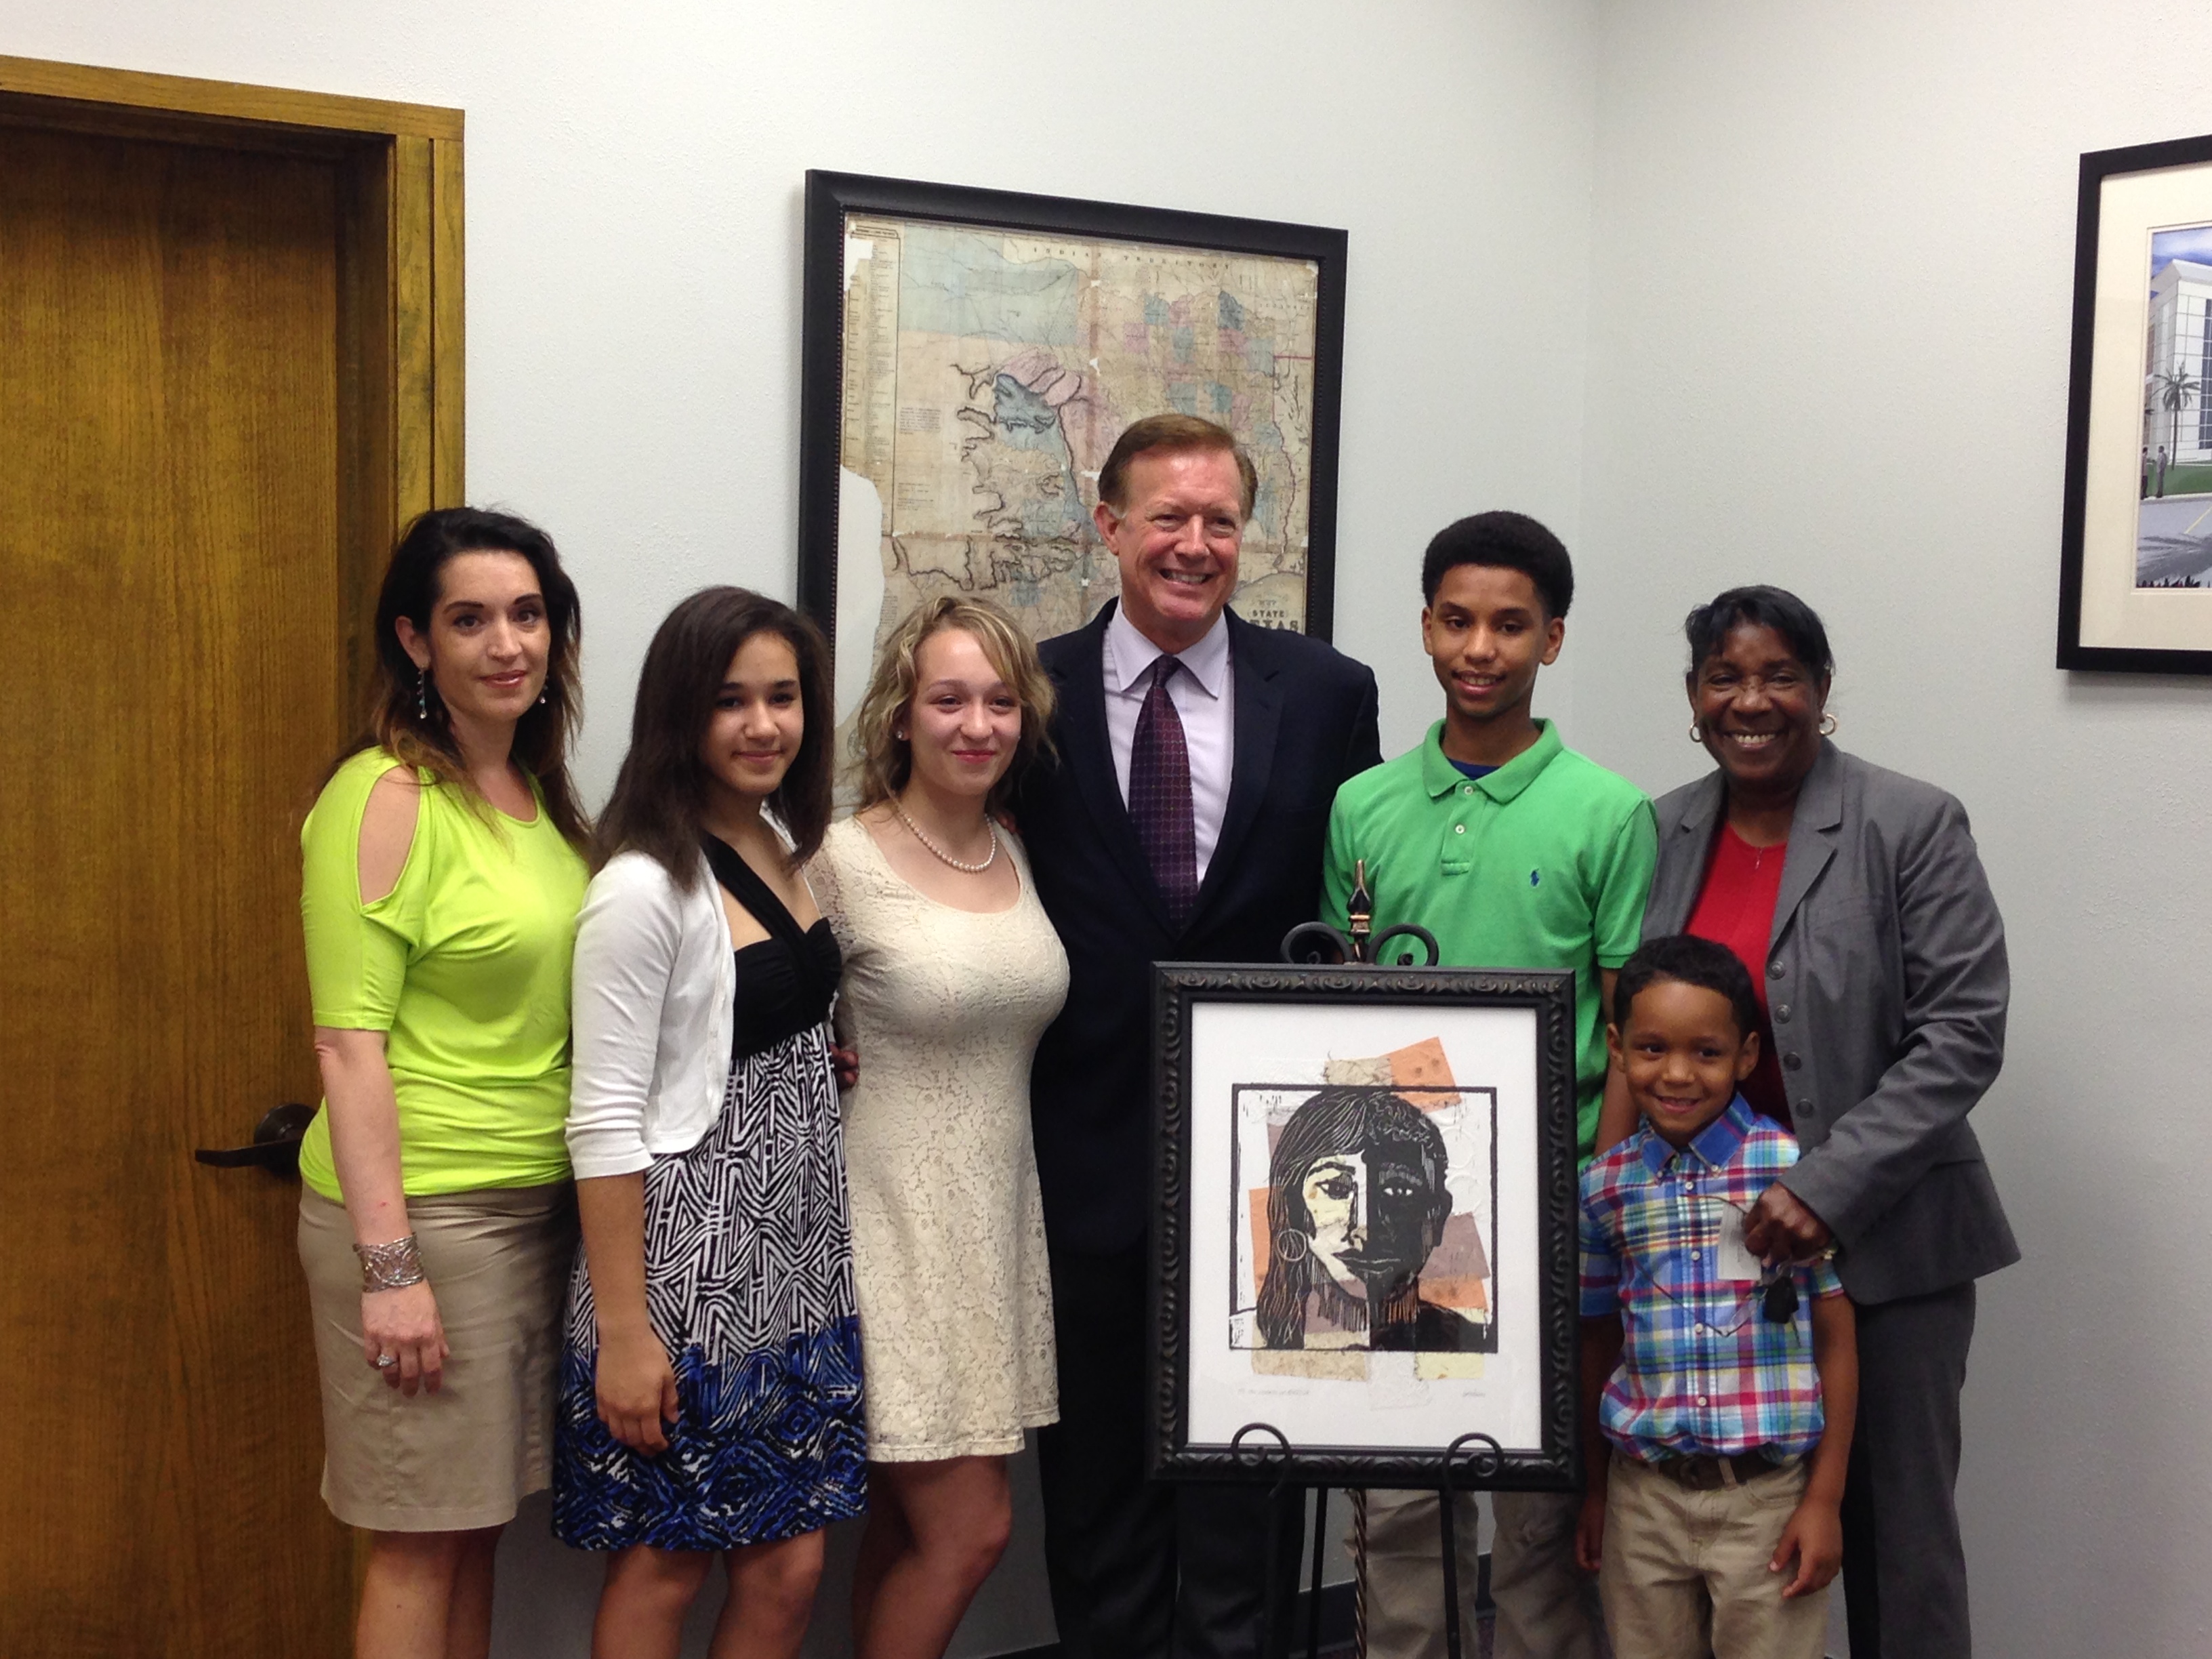 2014 Congressional Competition Winner, Zoe Gibbons